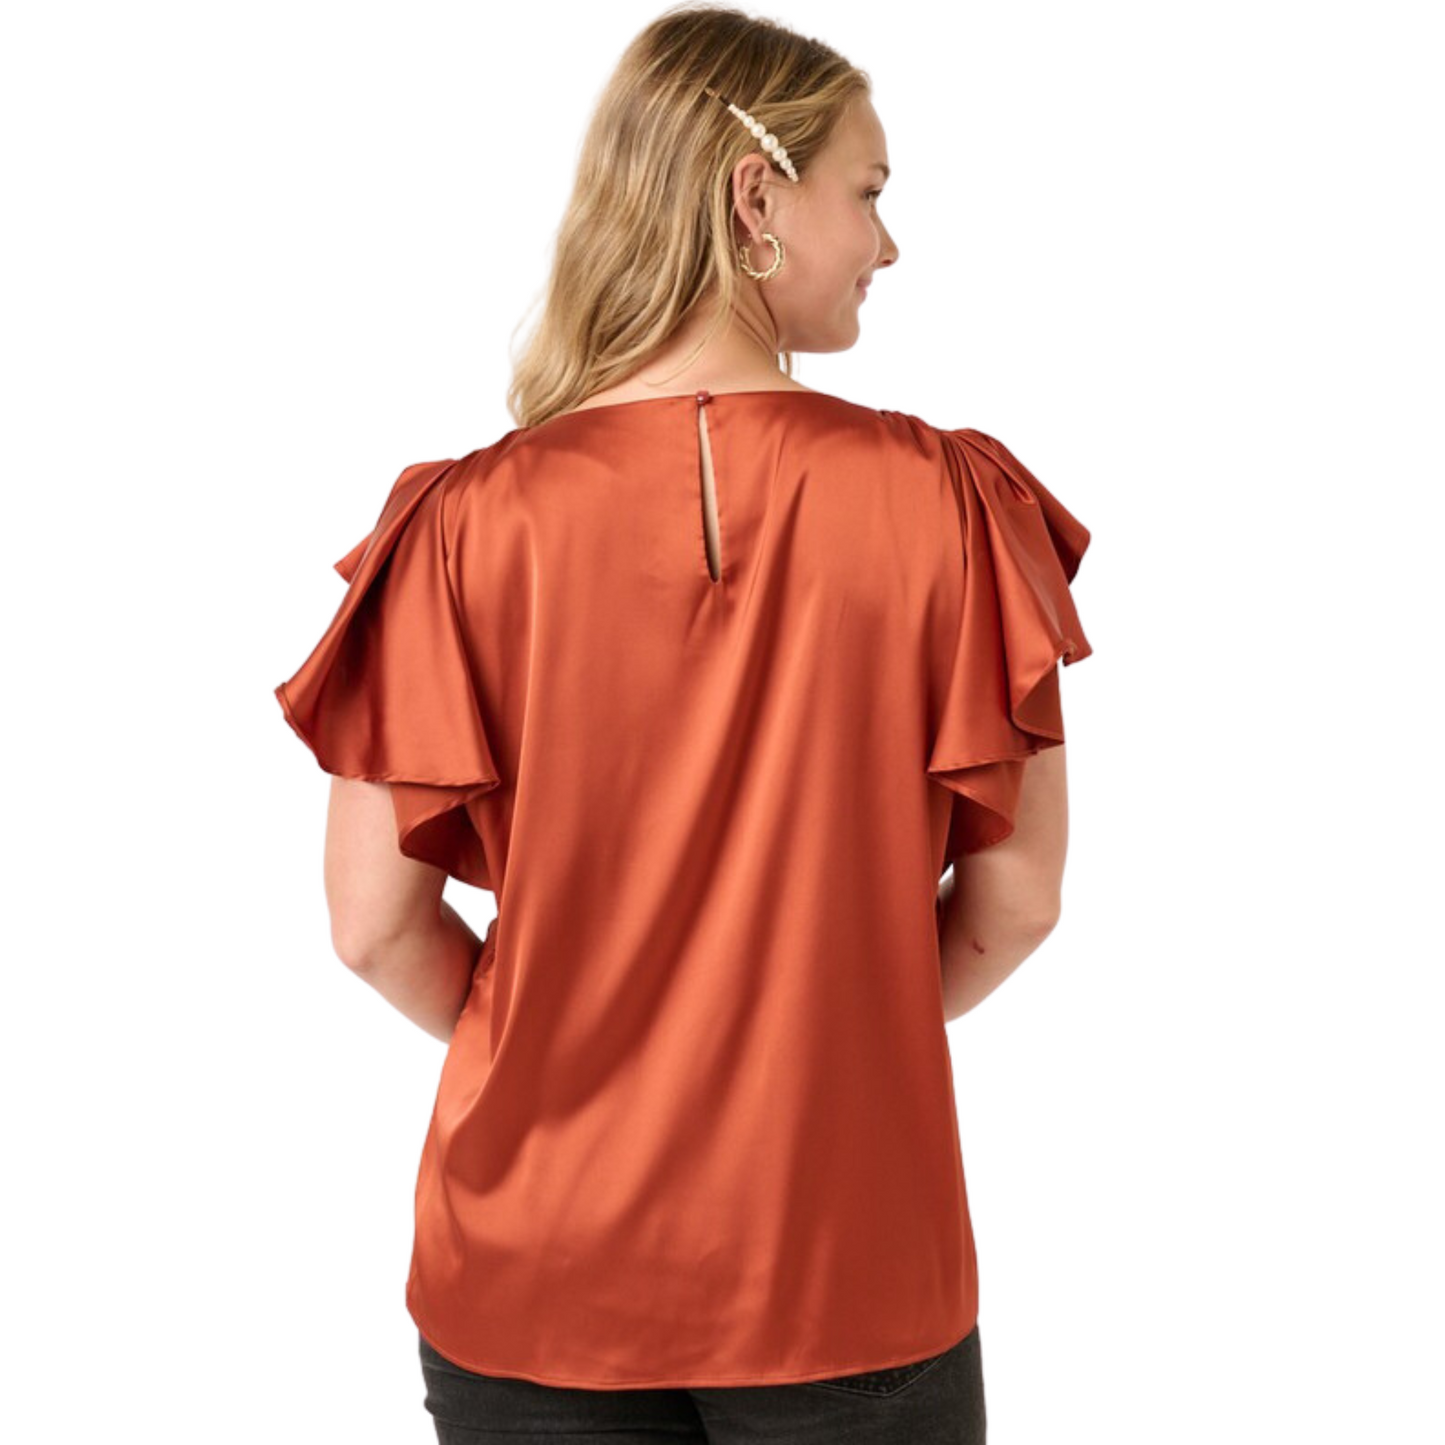 Plus size satin flutter sleeve top in rust